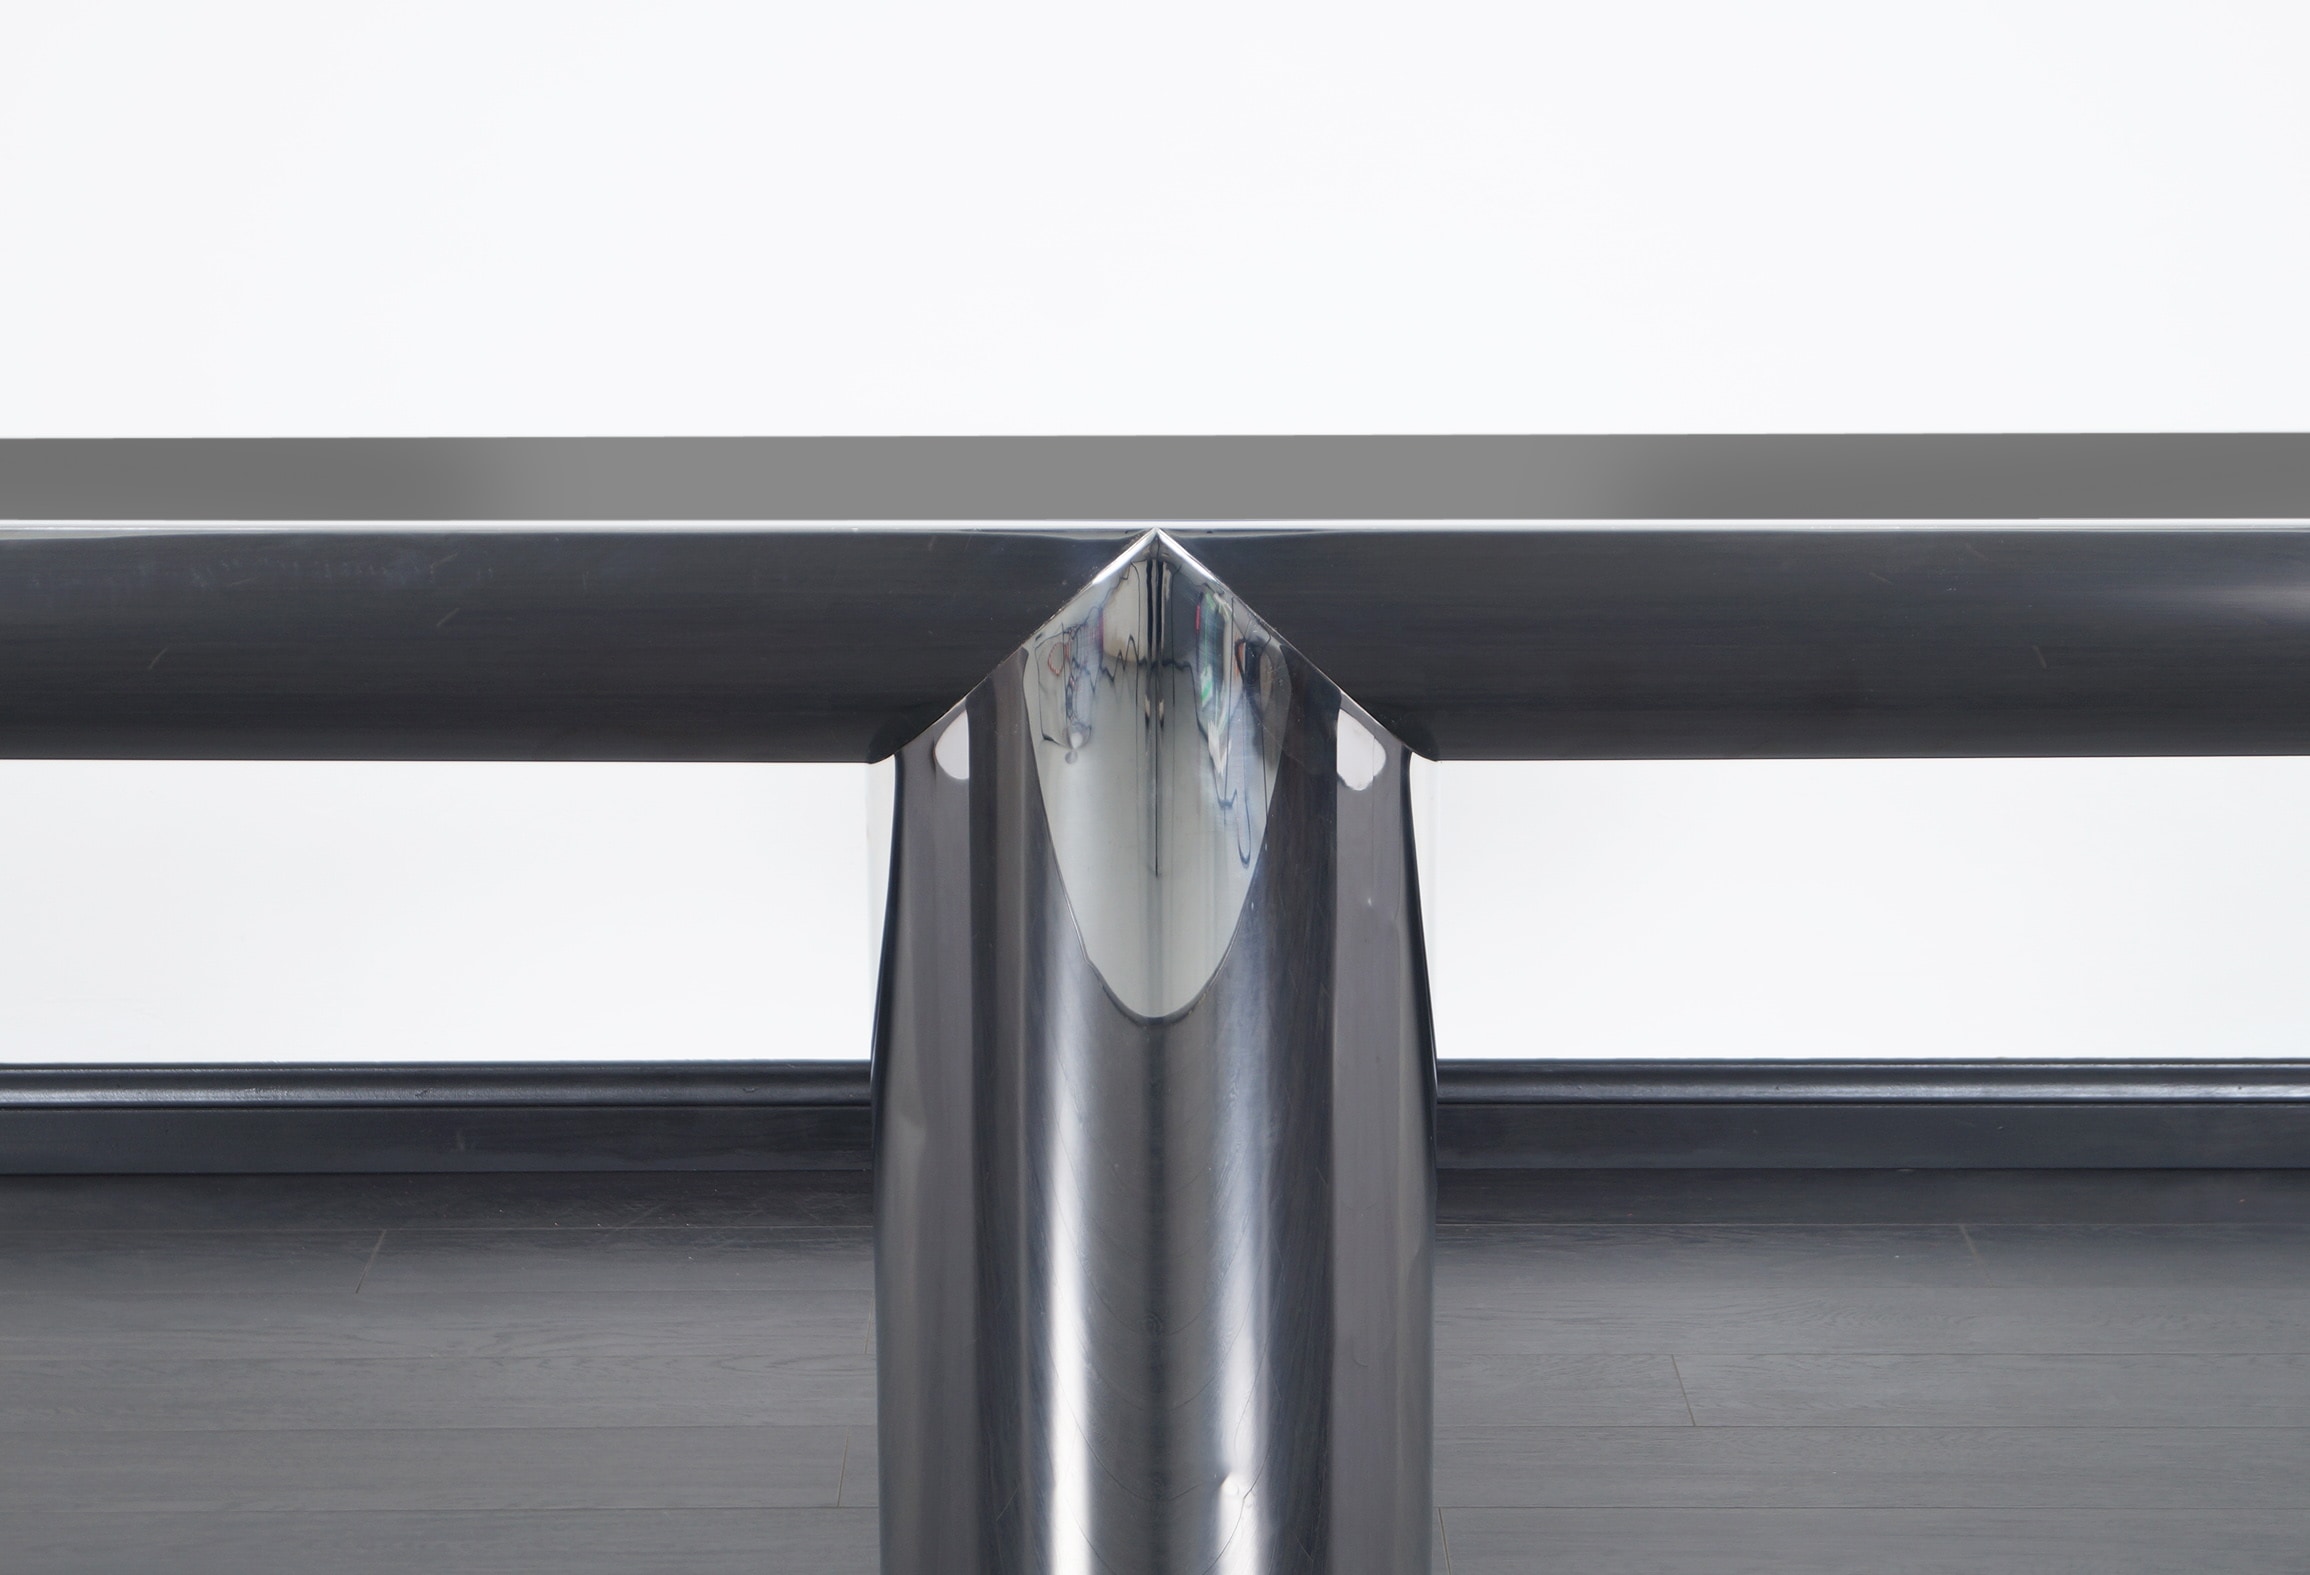 Vintage Stainless Steel Tee Console Table by Brueton